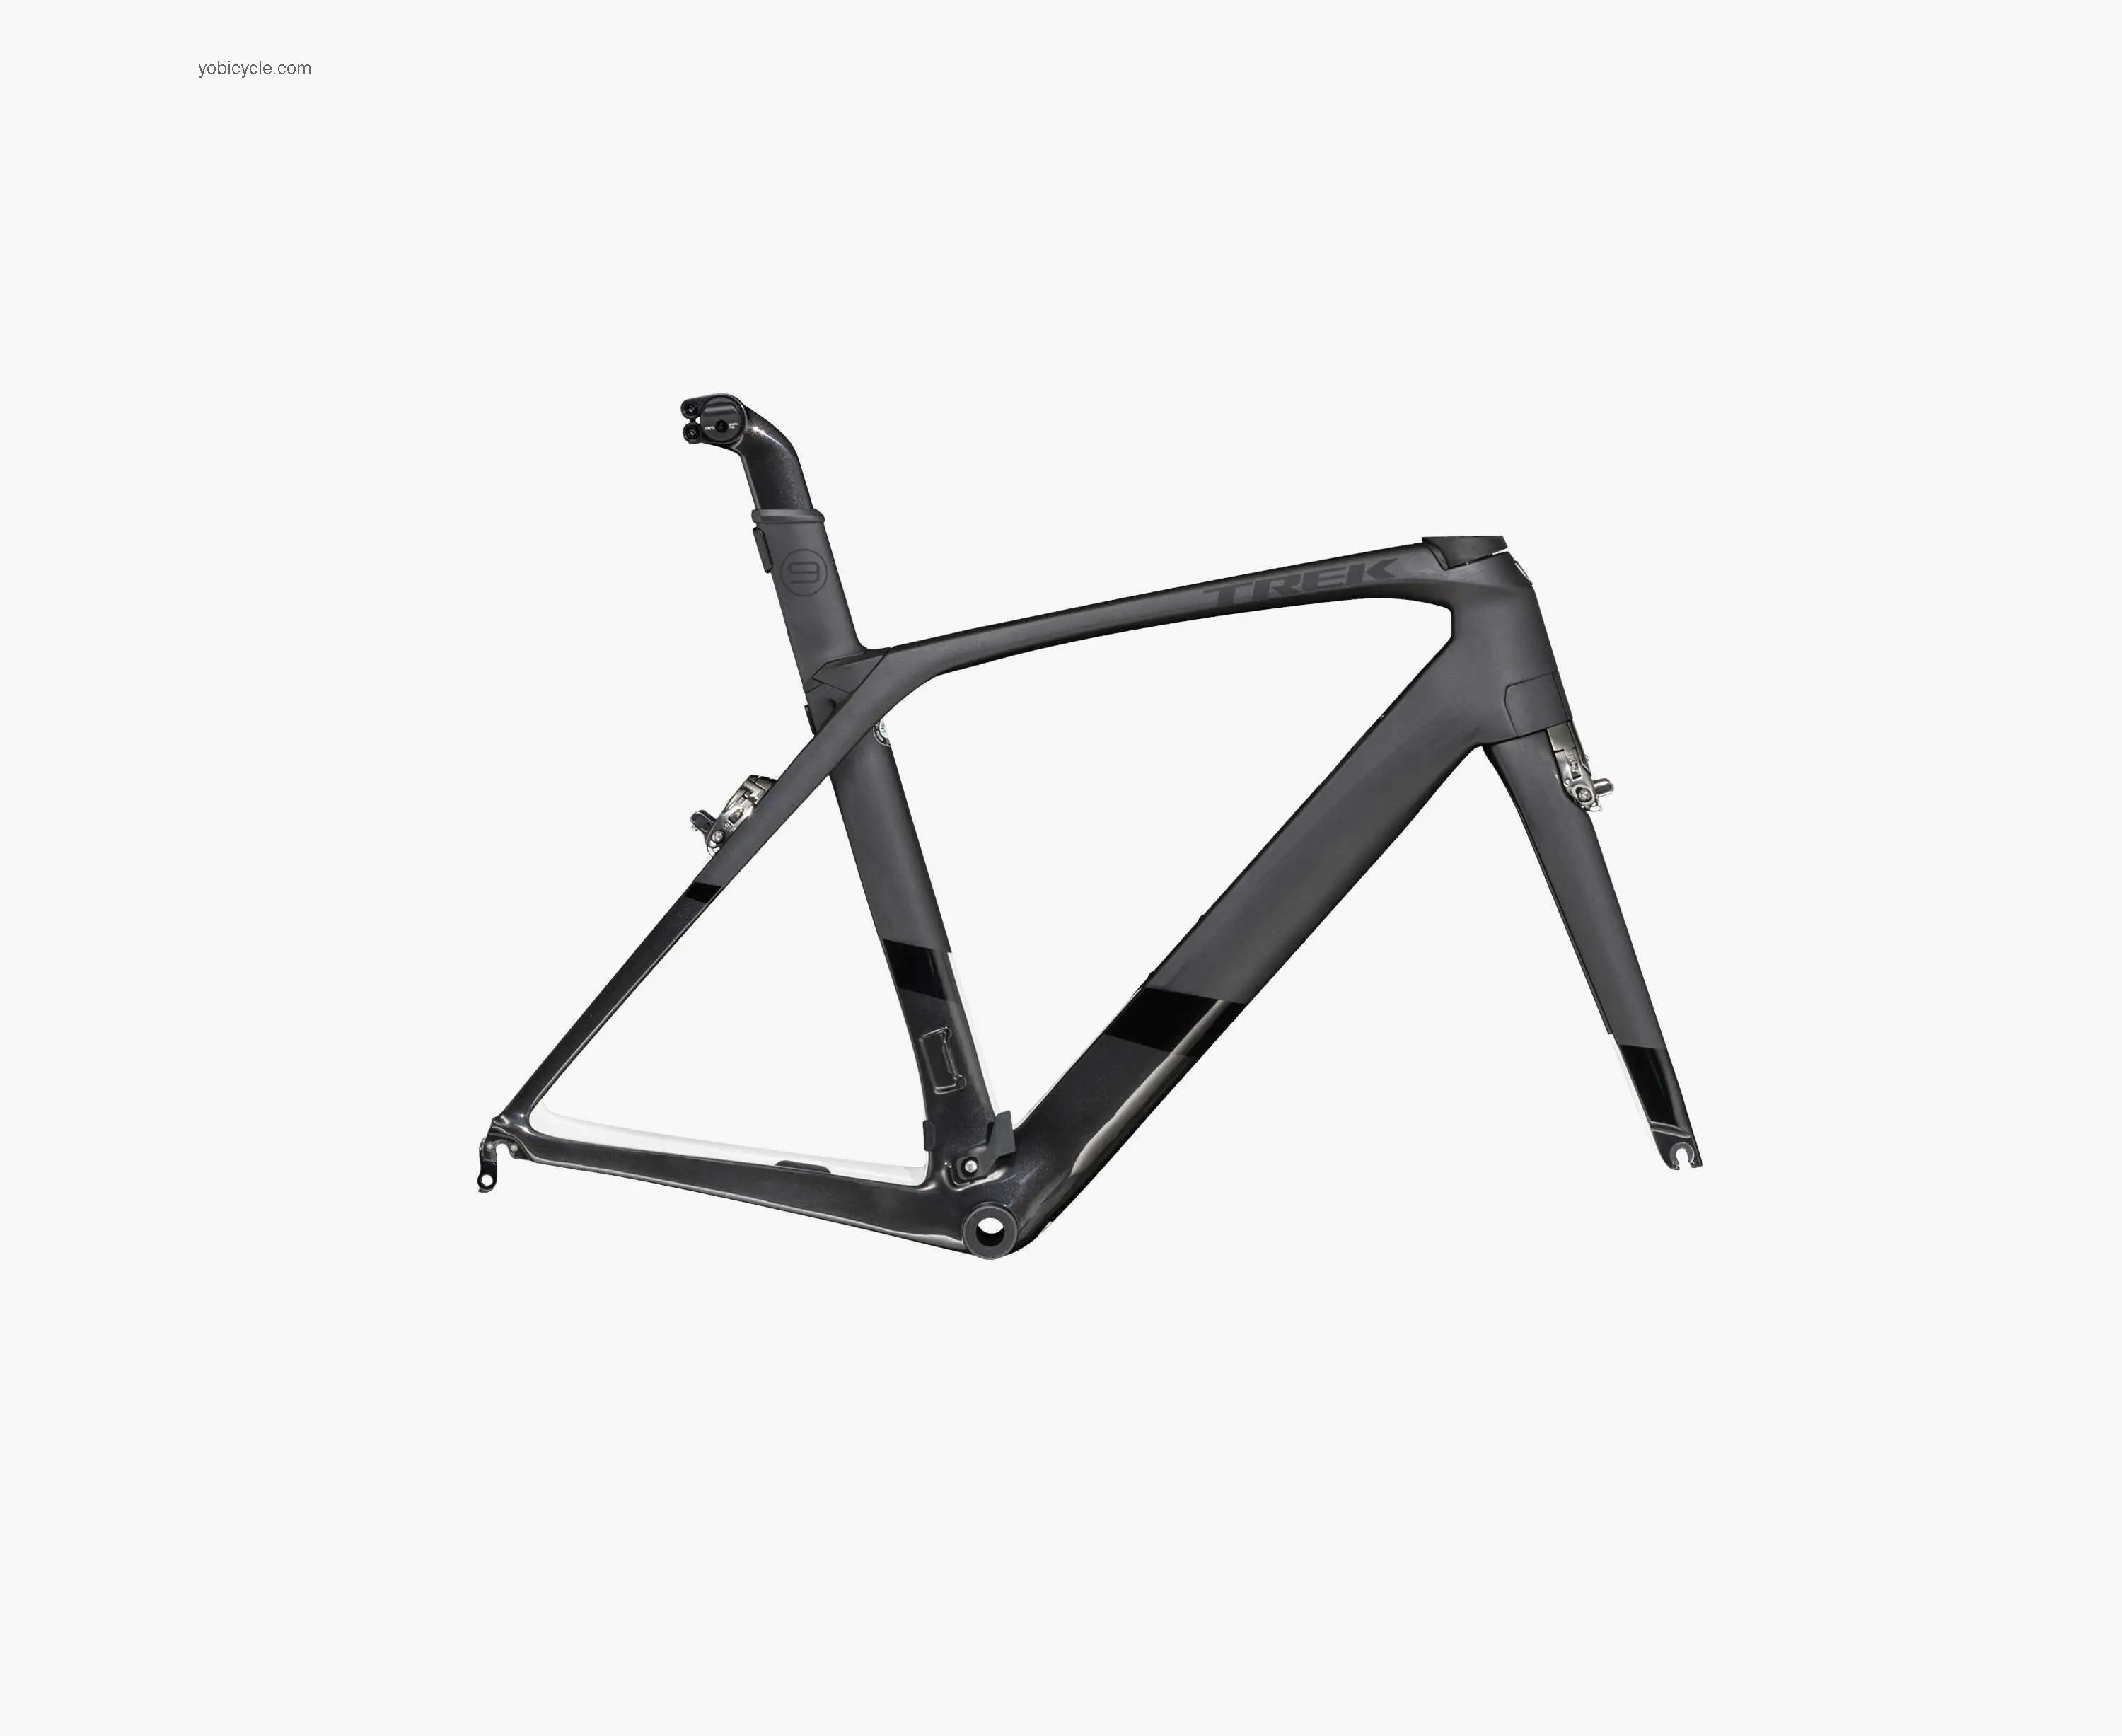 Trek Madone 9 Series Frameset H2 fit competitors and comparison tool online specs and performance